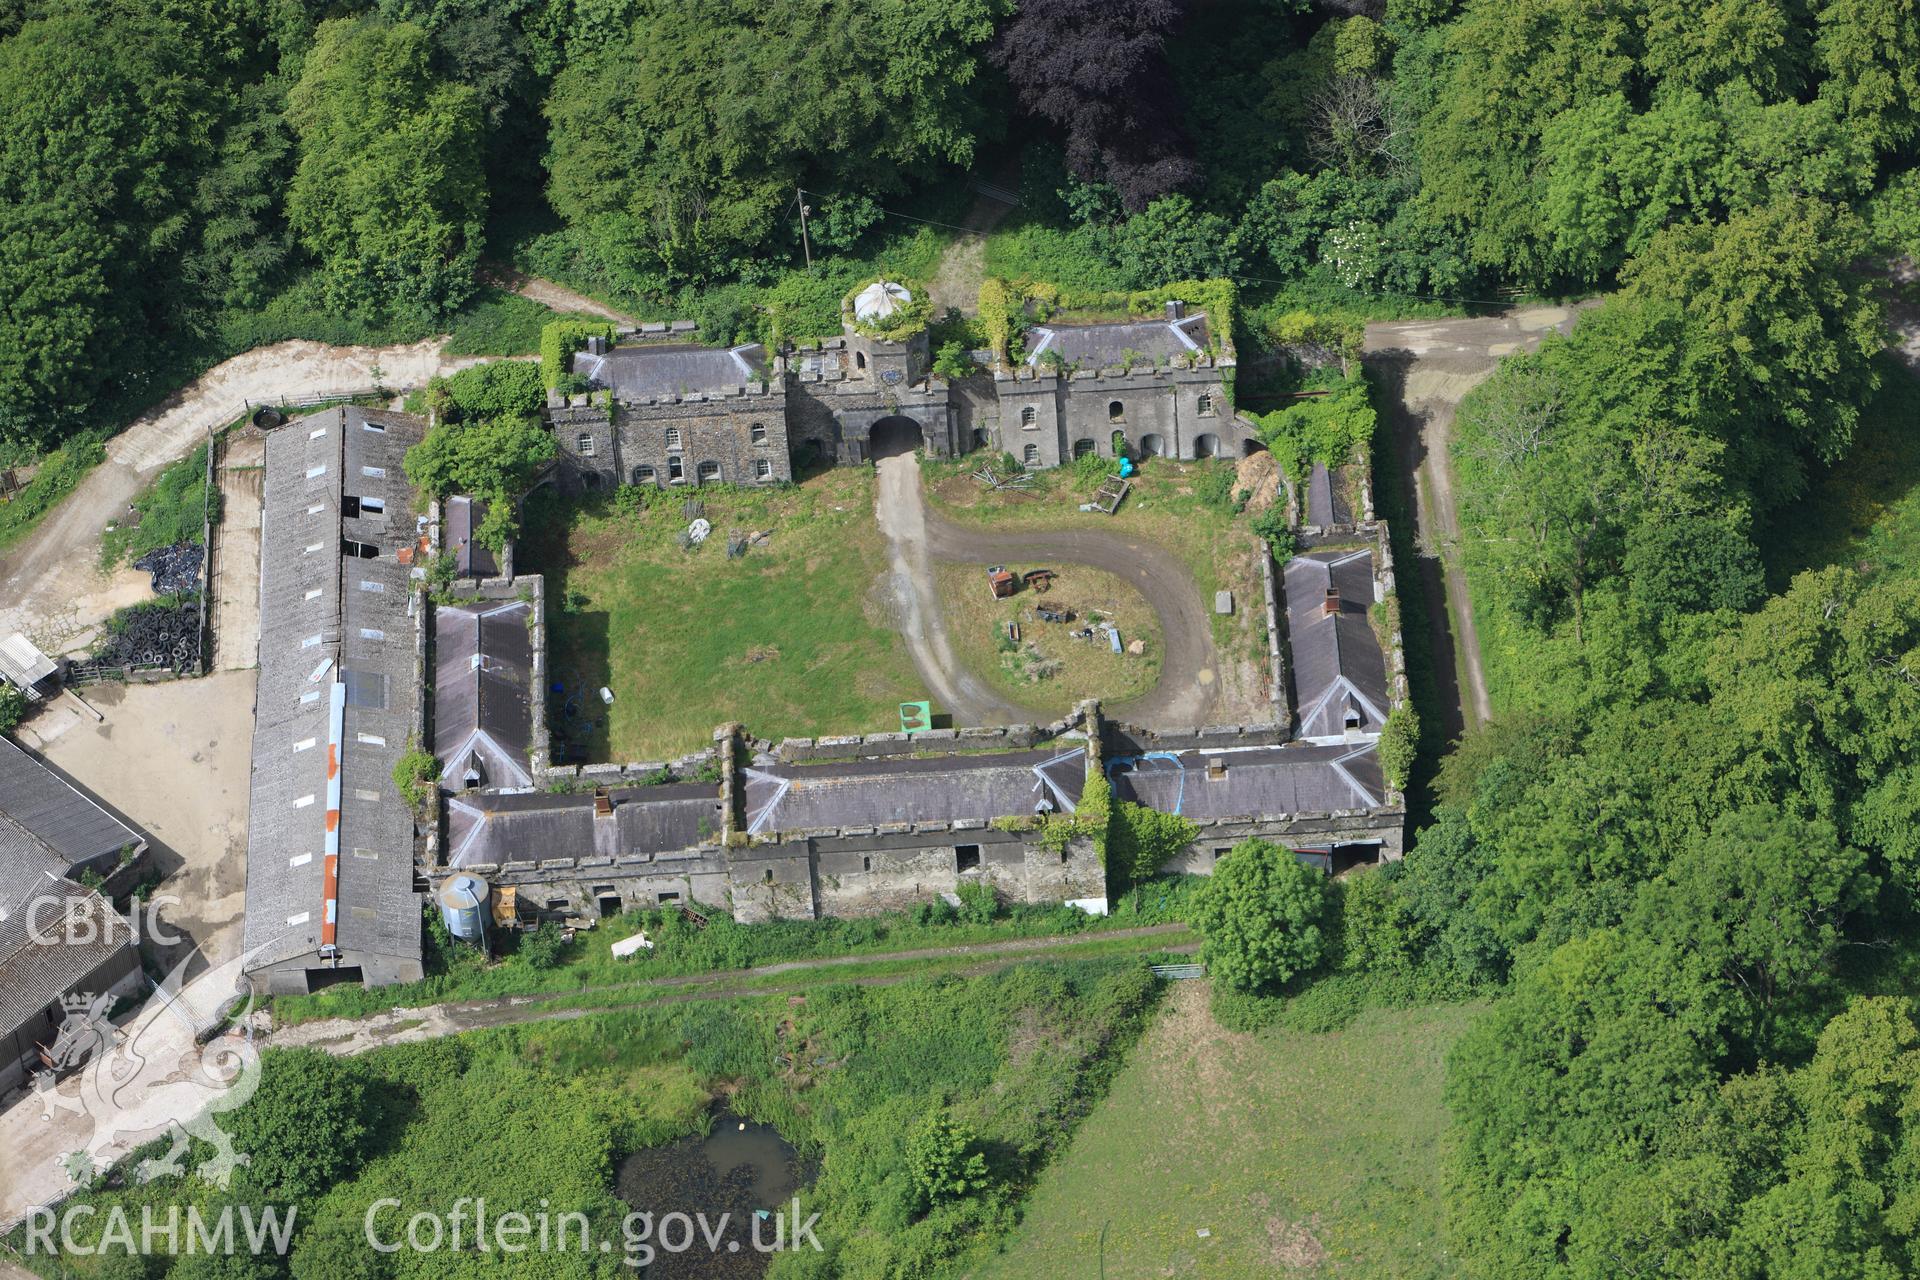 RCAHMW colour oblique photograph of Picton Castle stables. Taken by Toby Driver on 24/05/2011.